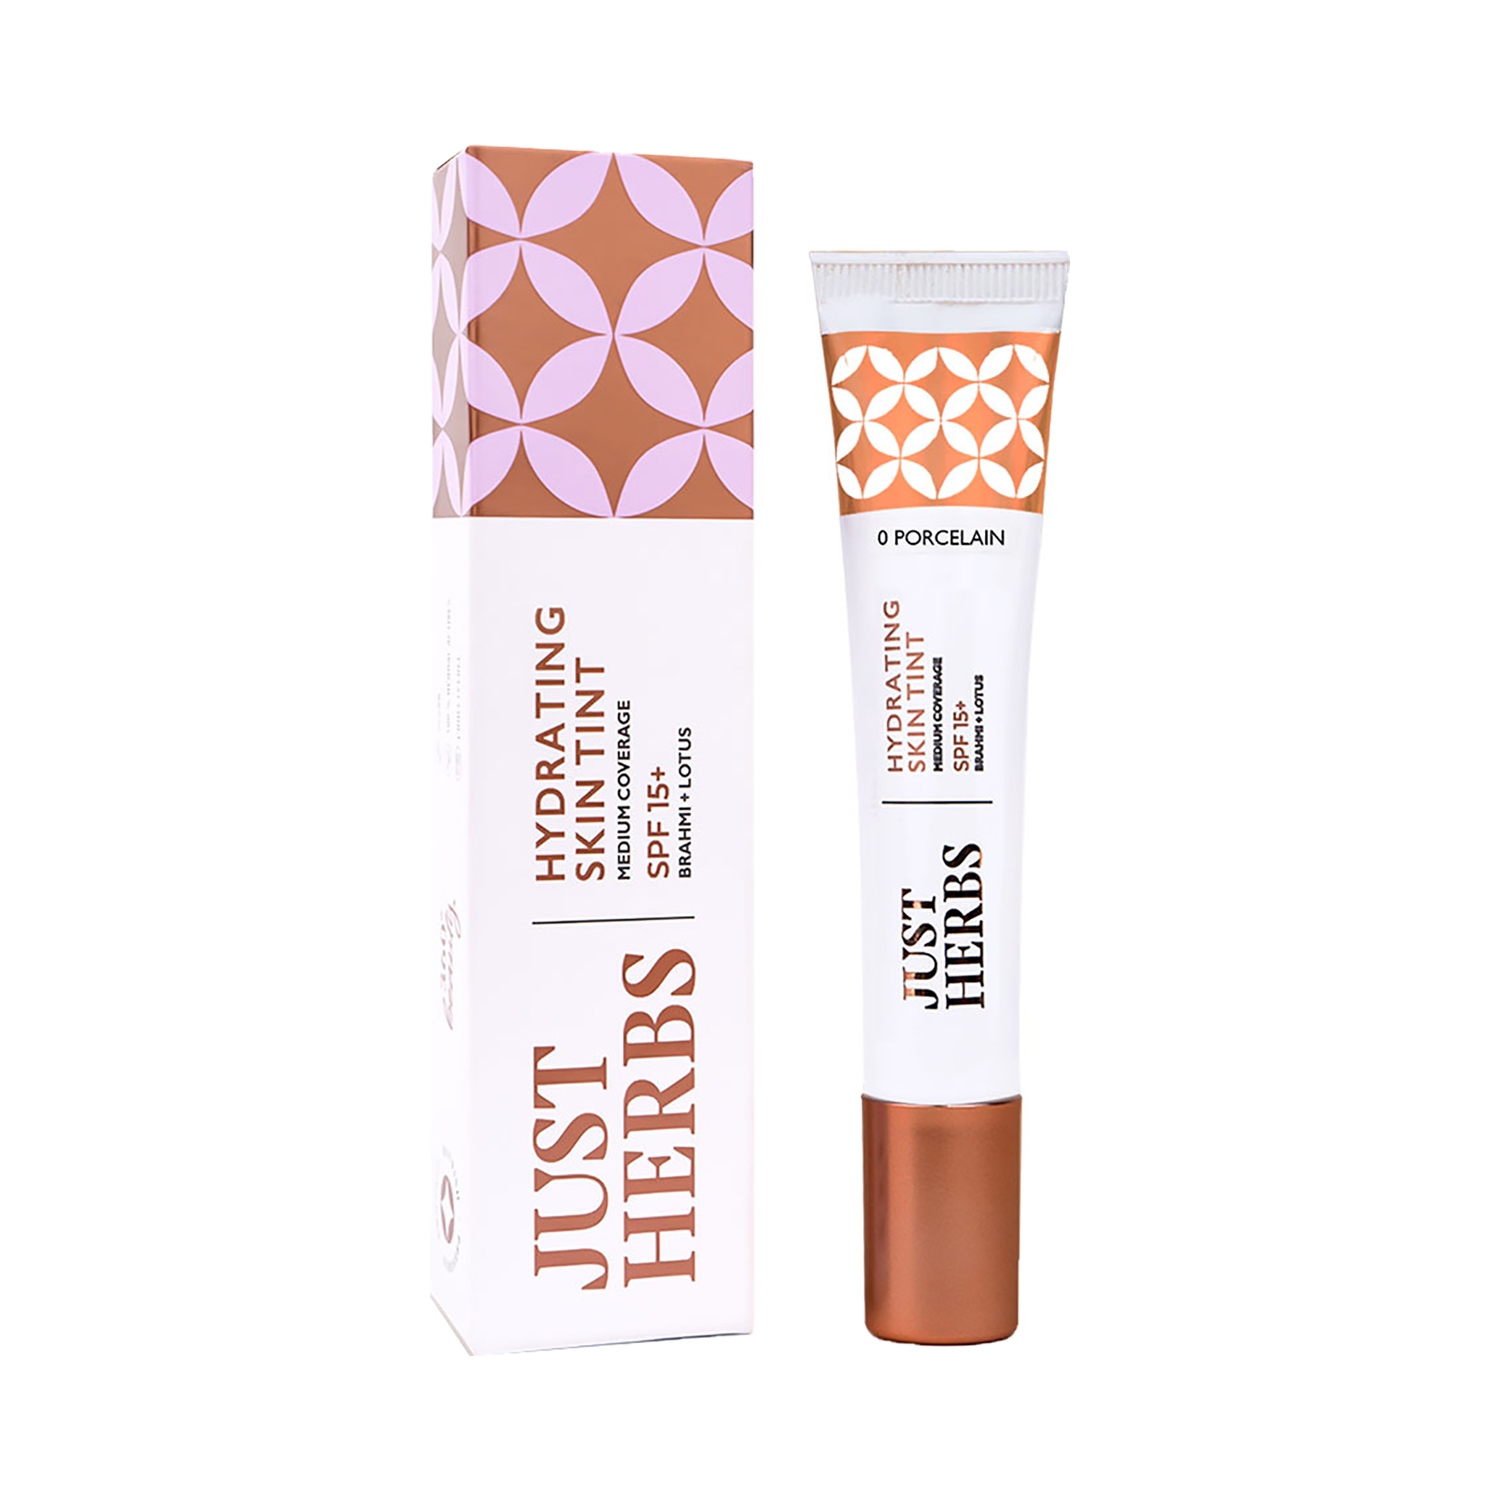 Just Herbs | Just Herbs Enriched Hydrating Skin Tint SPF 15+ - 0 Porcelain (20g)